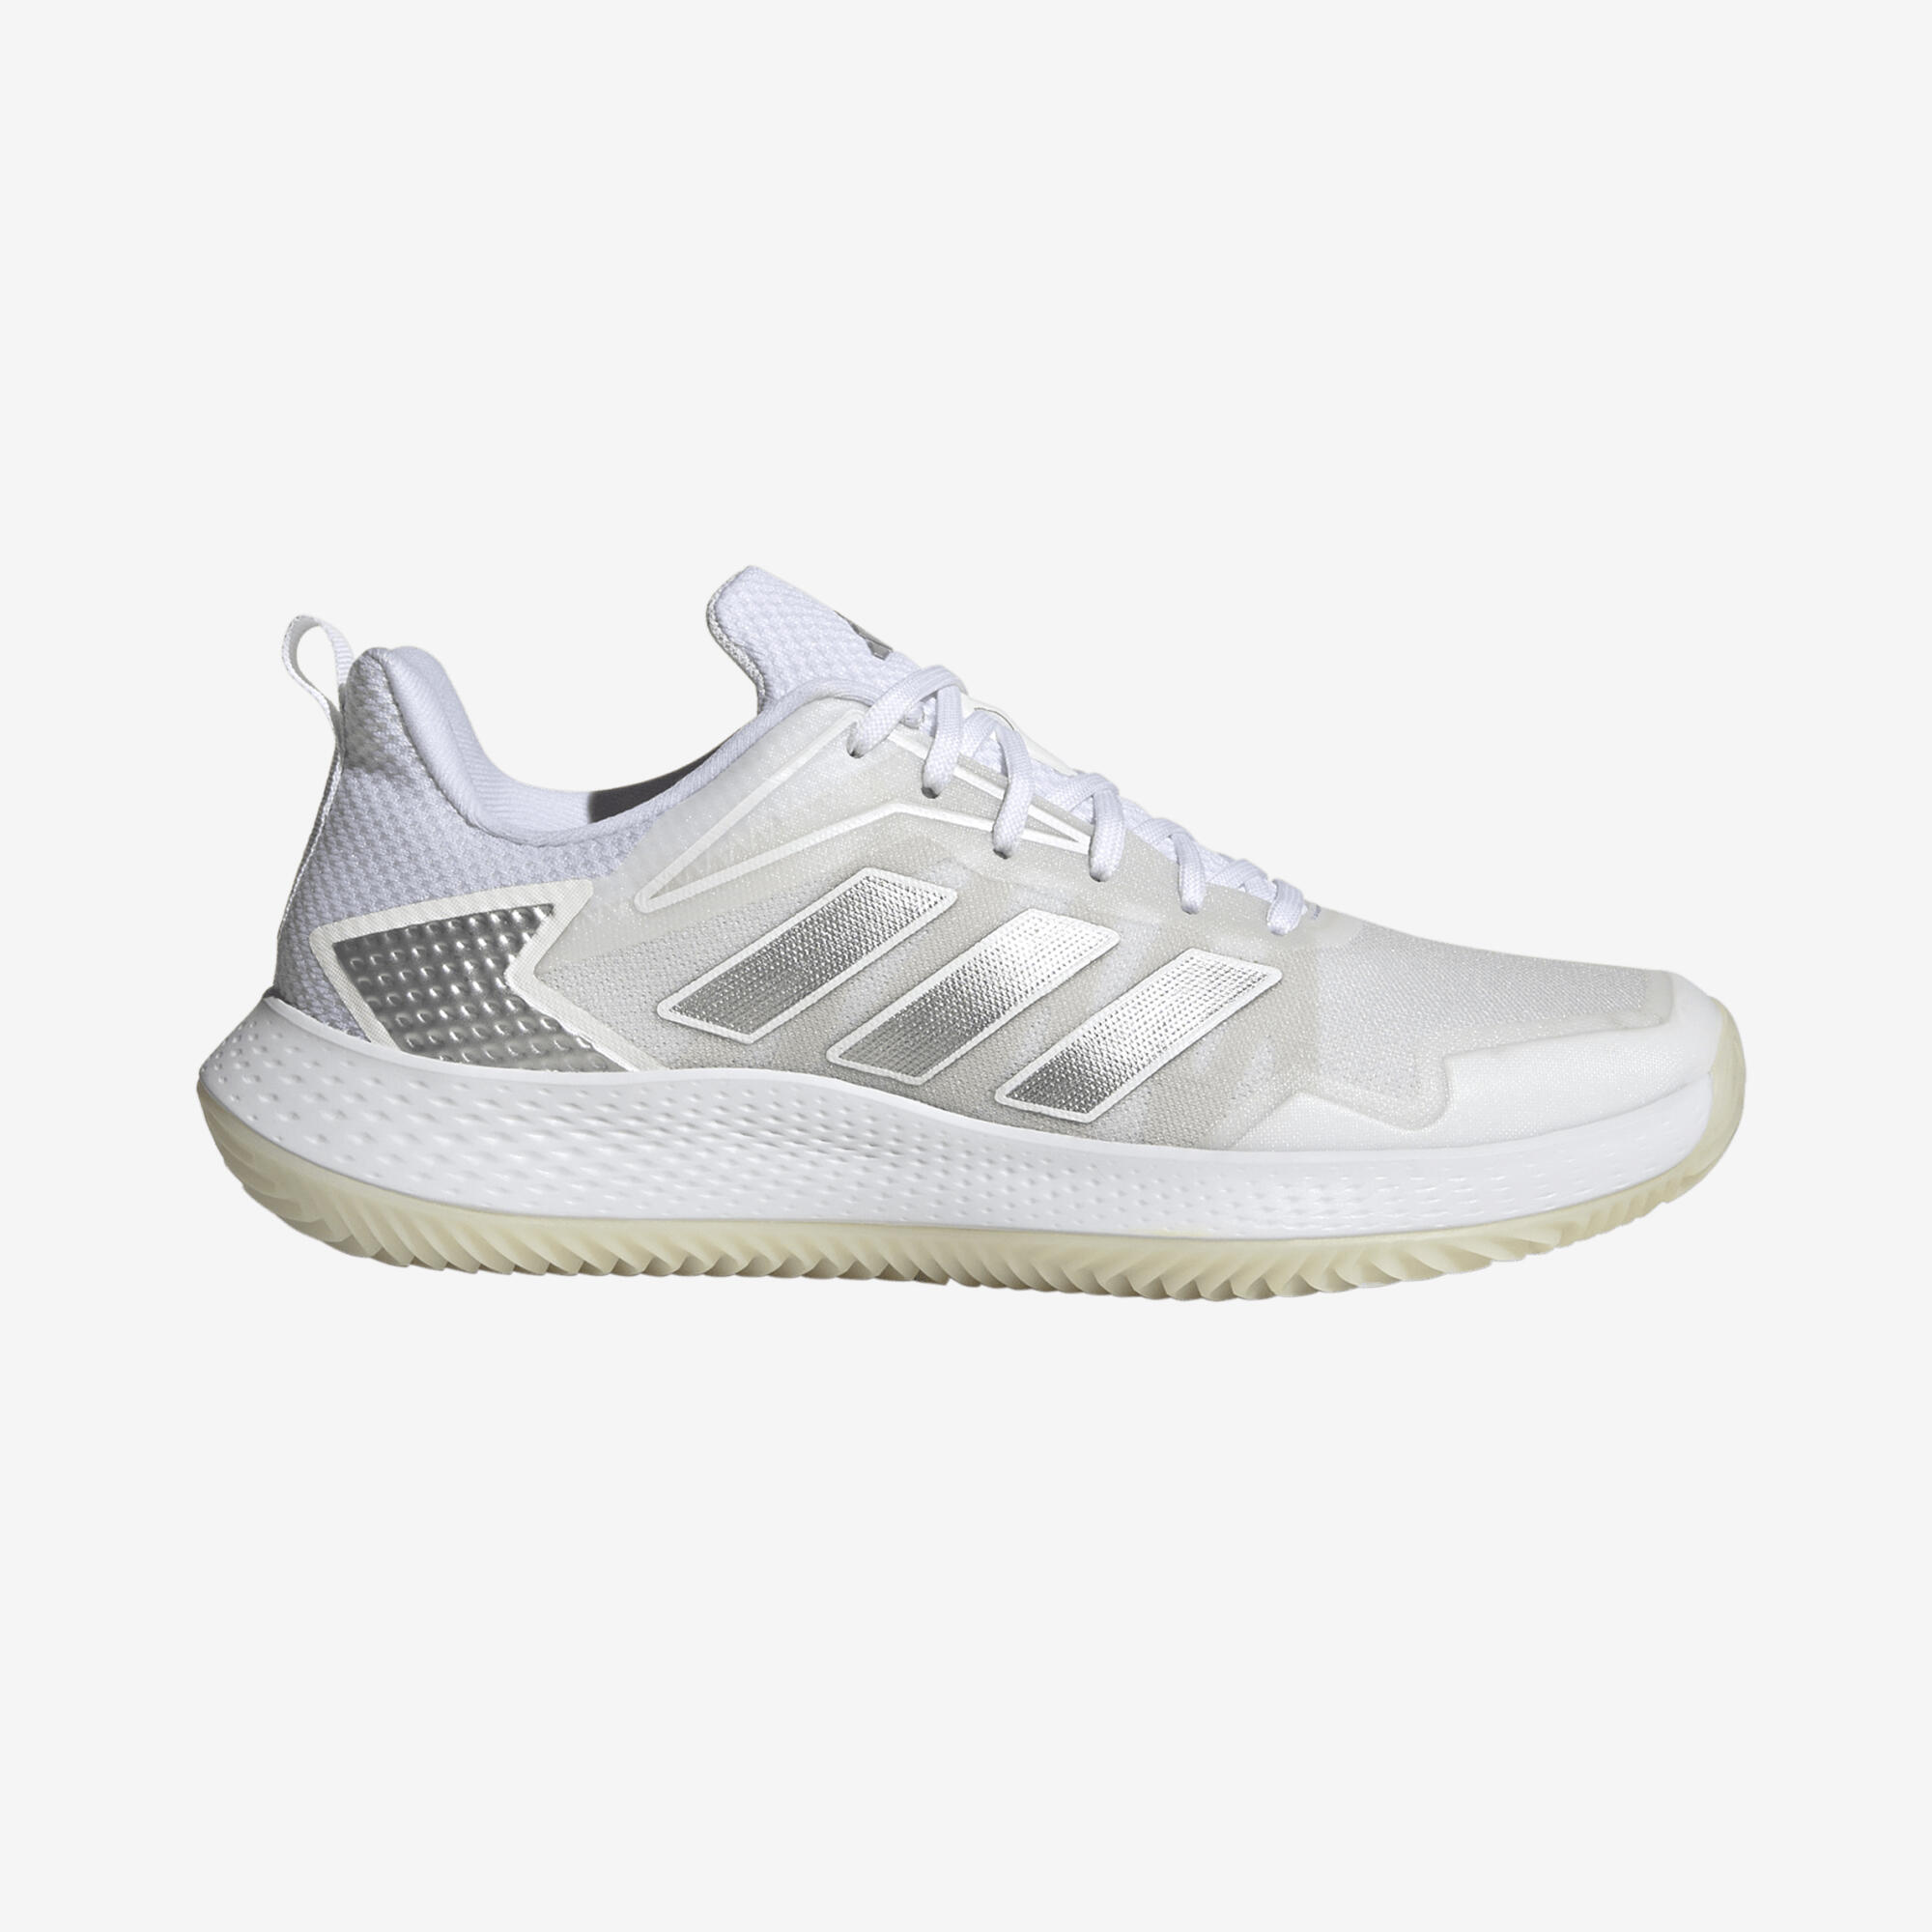 ADIDAS Women's Clay Court Tennis Shoes Defiant Speed - White/Silver